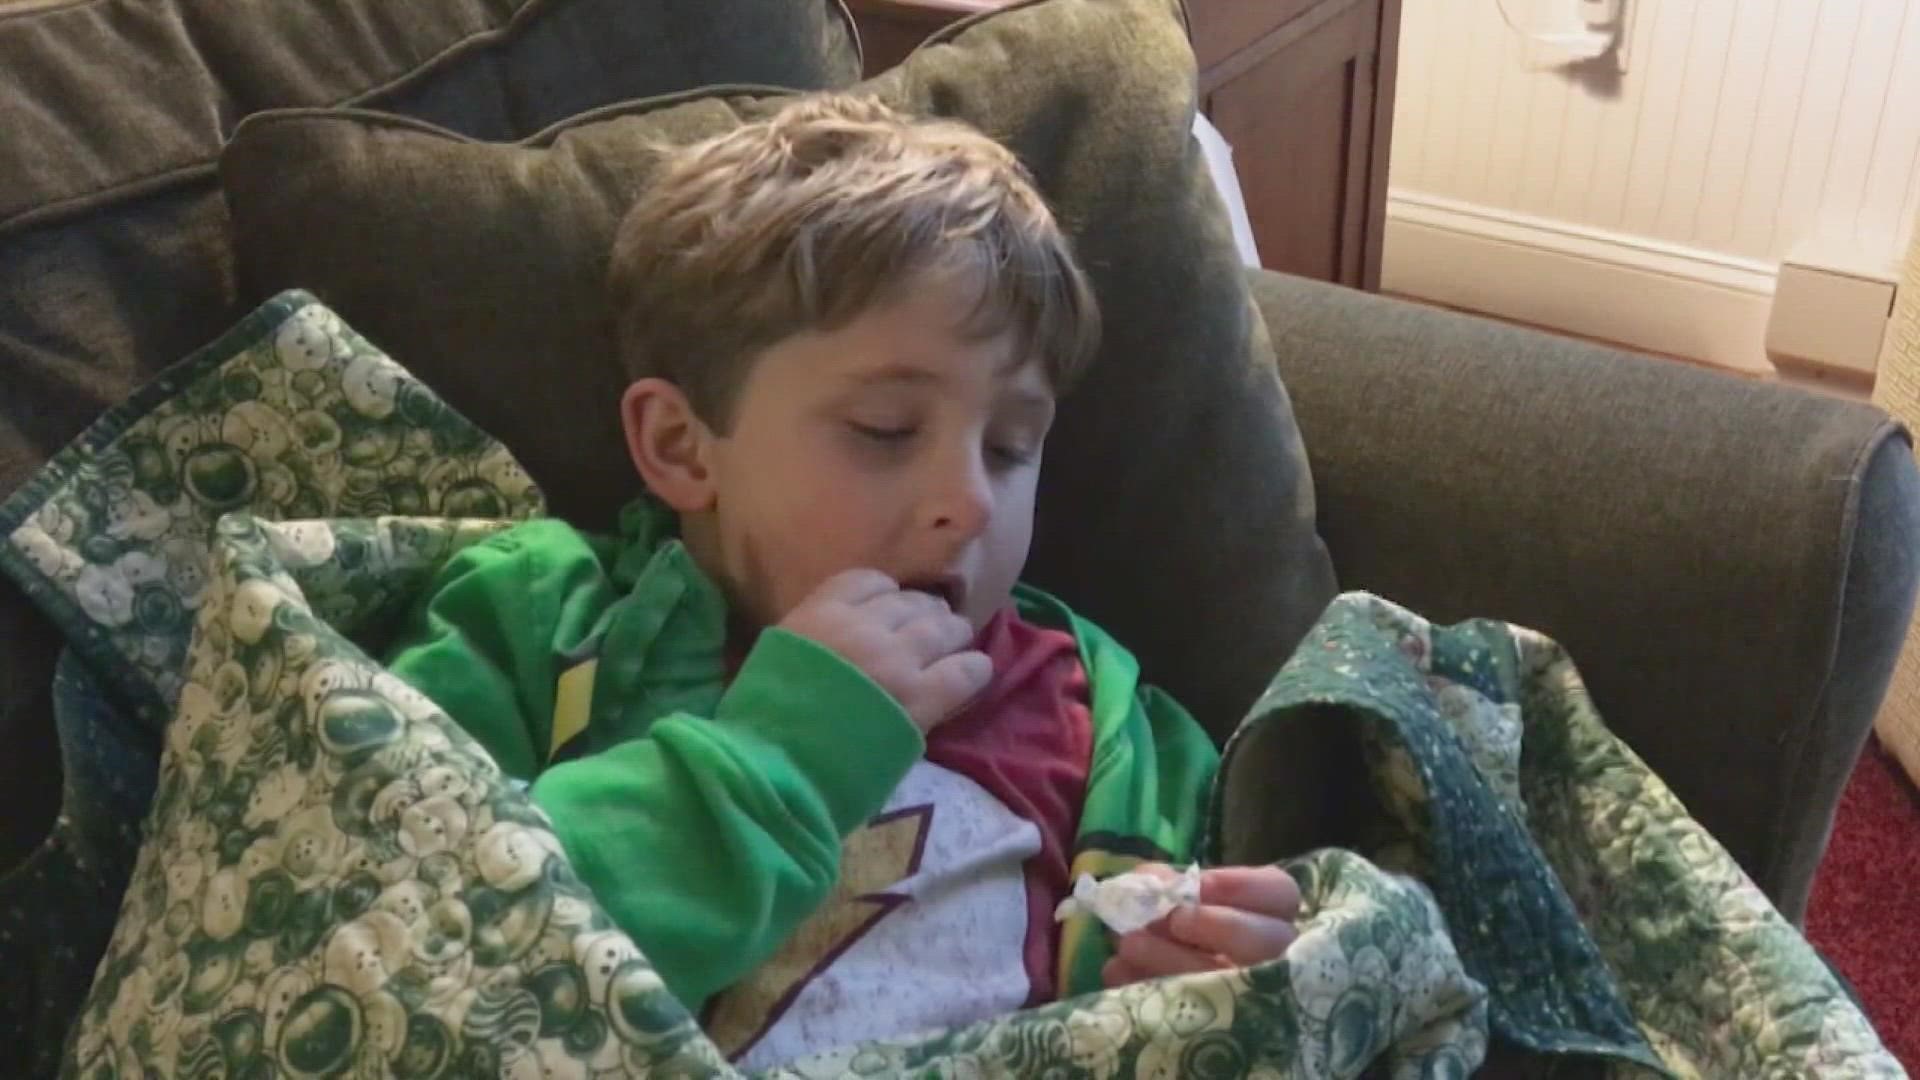 According to Consumer Reports, the average child gets 8 to 10 colds a year.